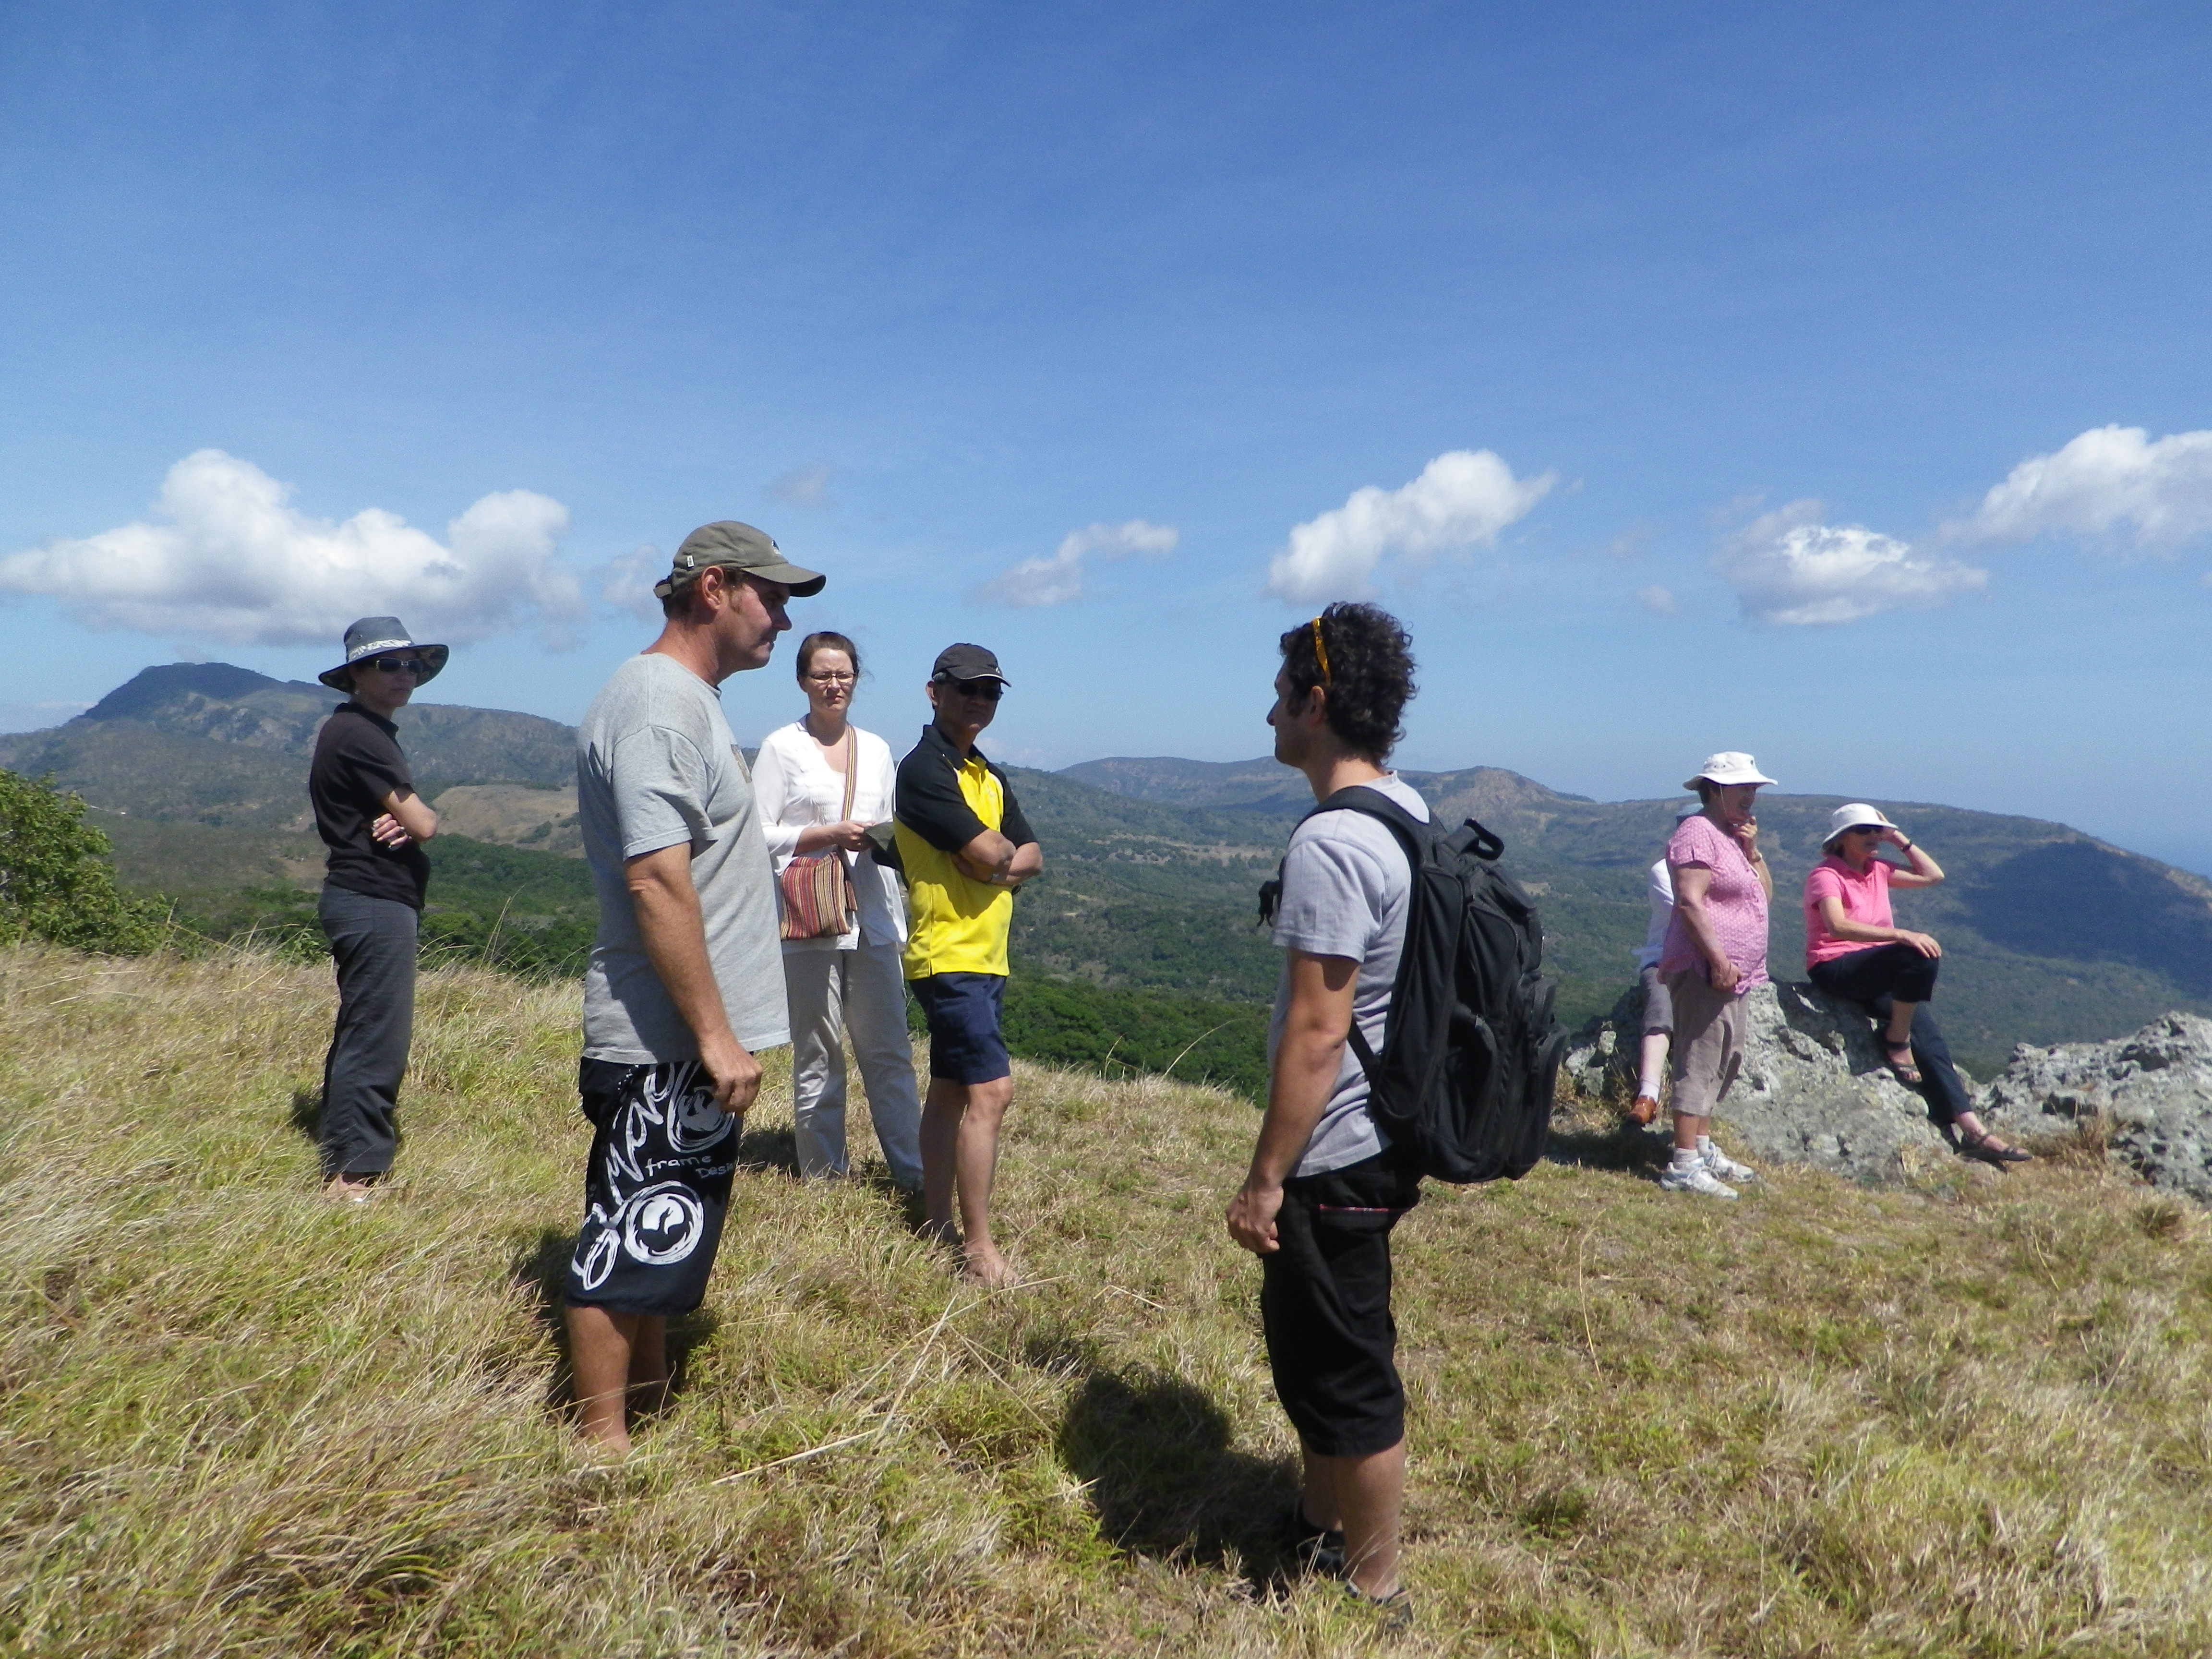 Group of Timor Leste encounter participants standing on a mountain